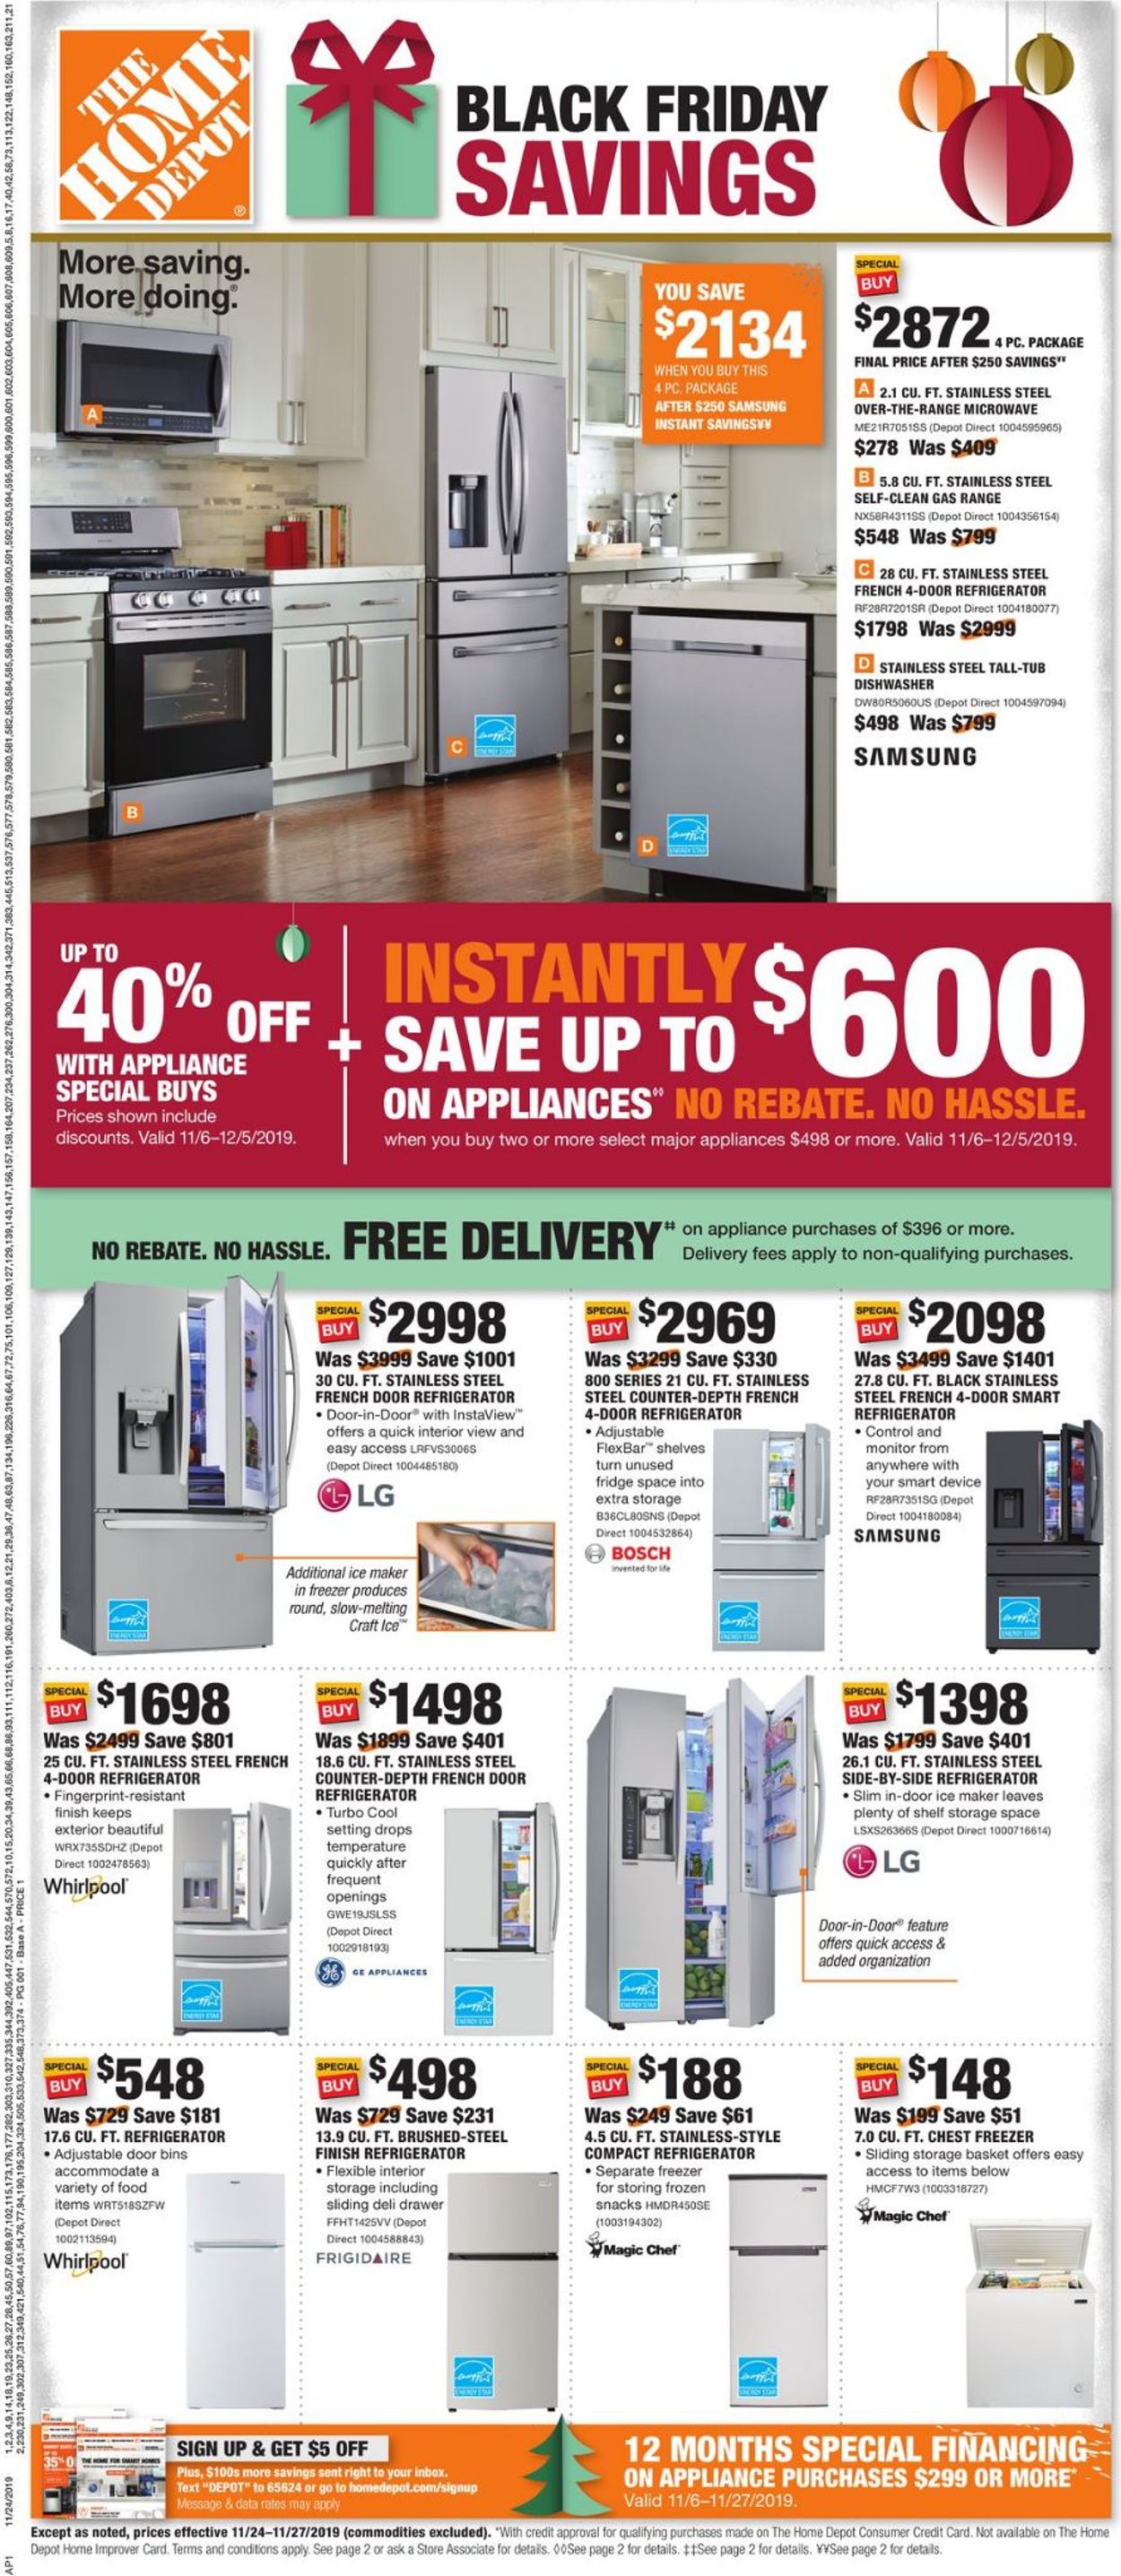 Home Depot - Black Friday Ad 2019 Current weekly ad 11/24 - 11/27/2019 - www.bagssaleusa.com/product-category/scarves/